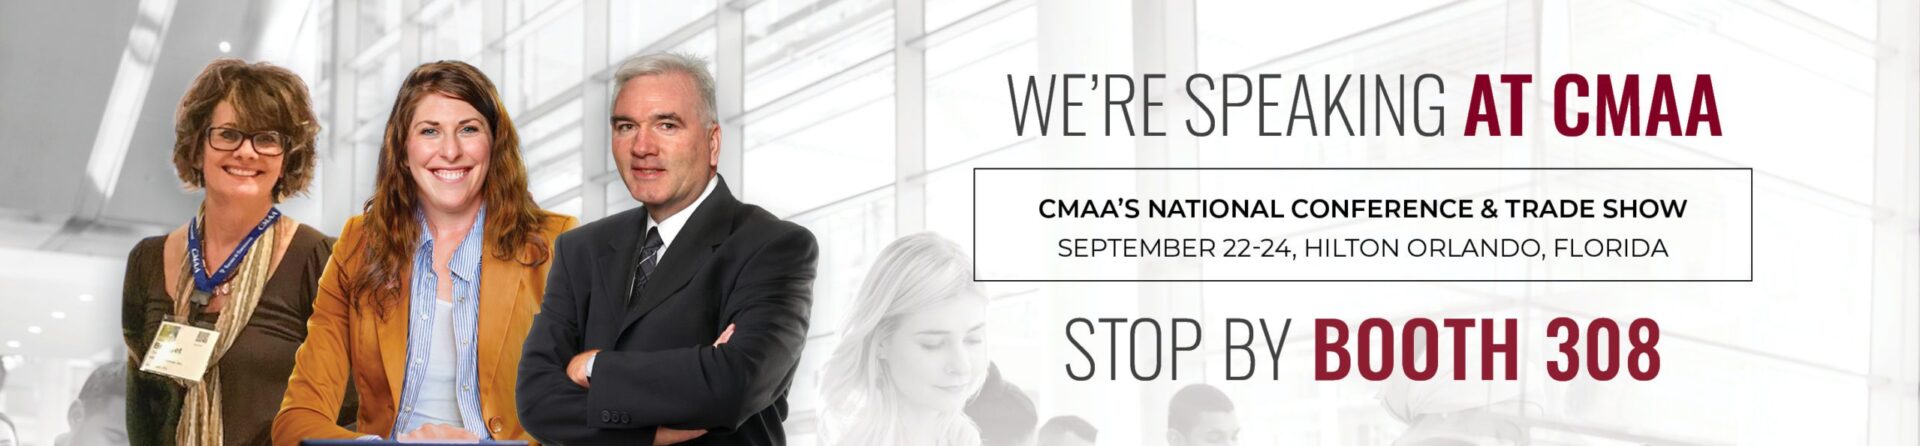 Hill Internationals Industry Experts to Speak at CMAAs National Conference and Trade Show banner